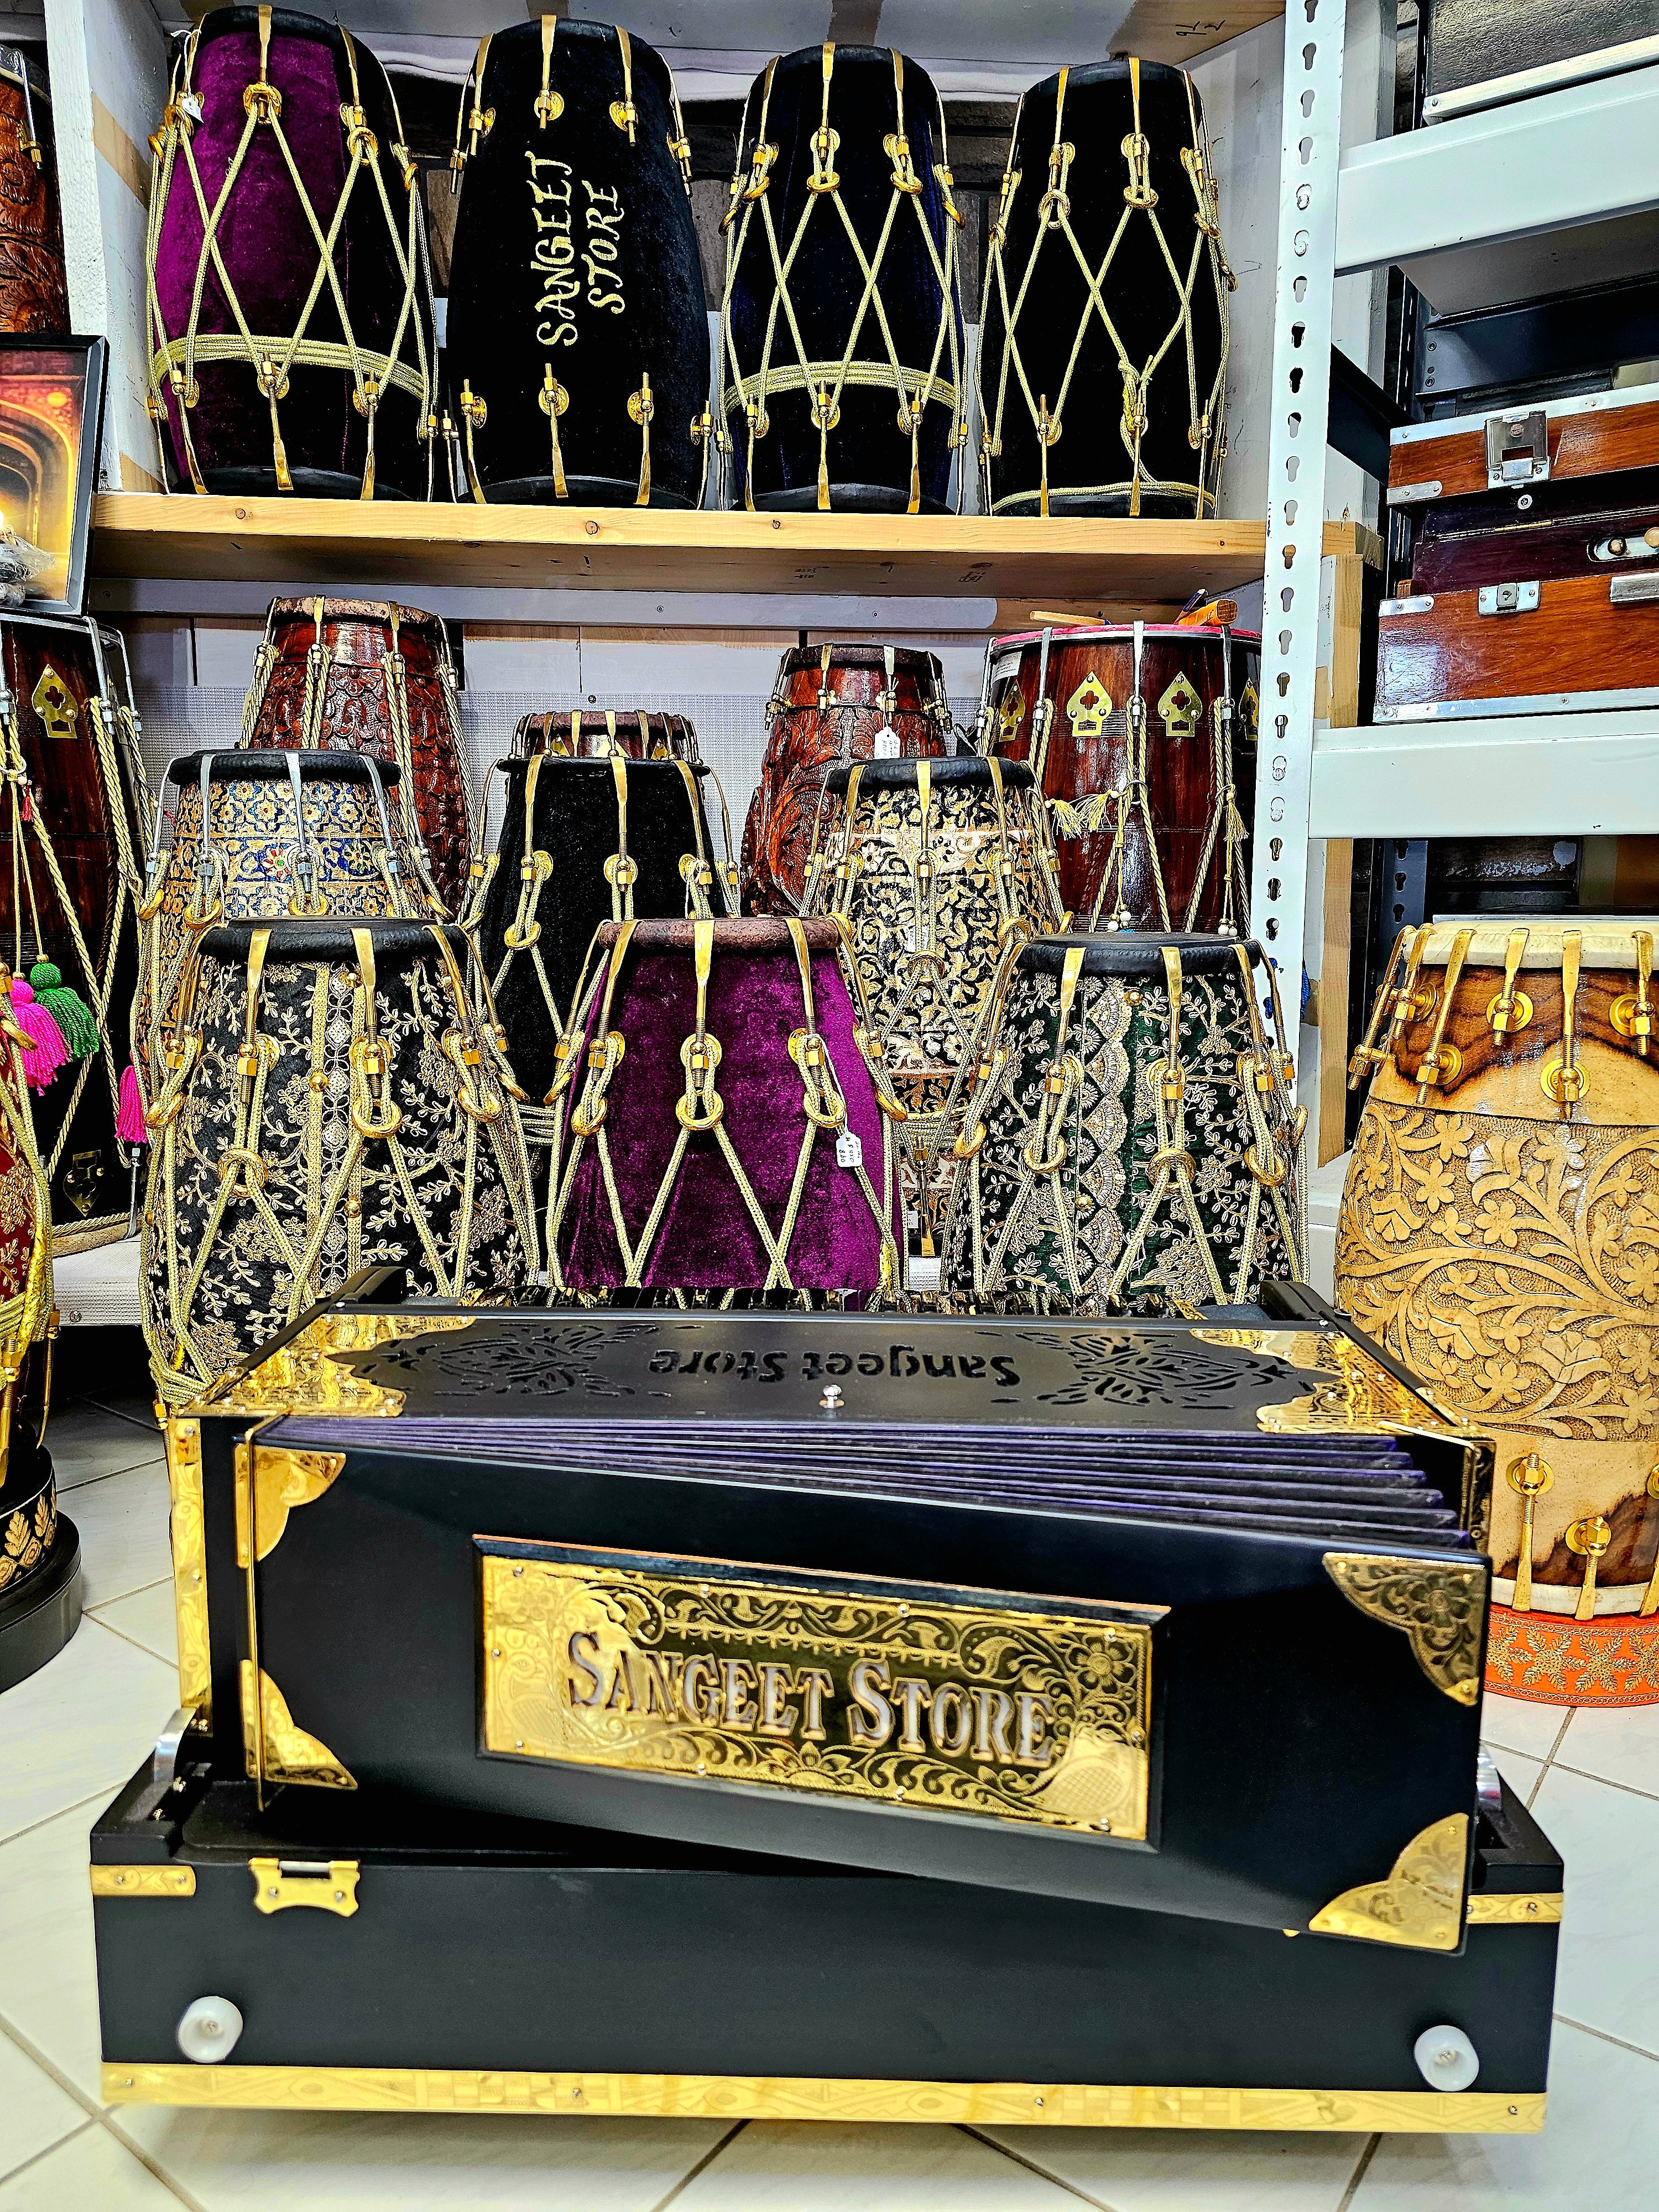 Harmony Noir Elegance: Matte Black 3 Reed BMF 9 Scale-Changer Sangeet Store Harmonium with Black-on-Black Keys and Golden Accents